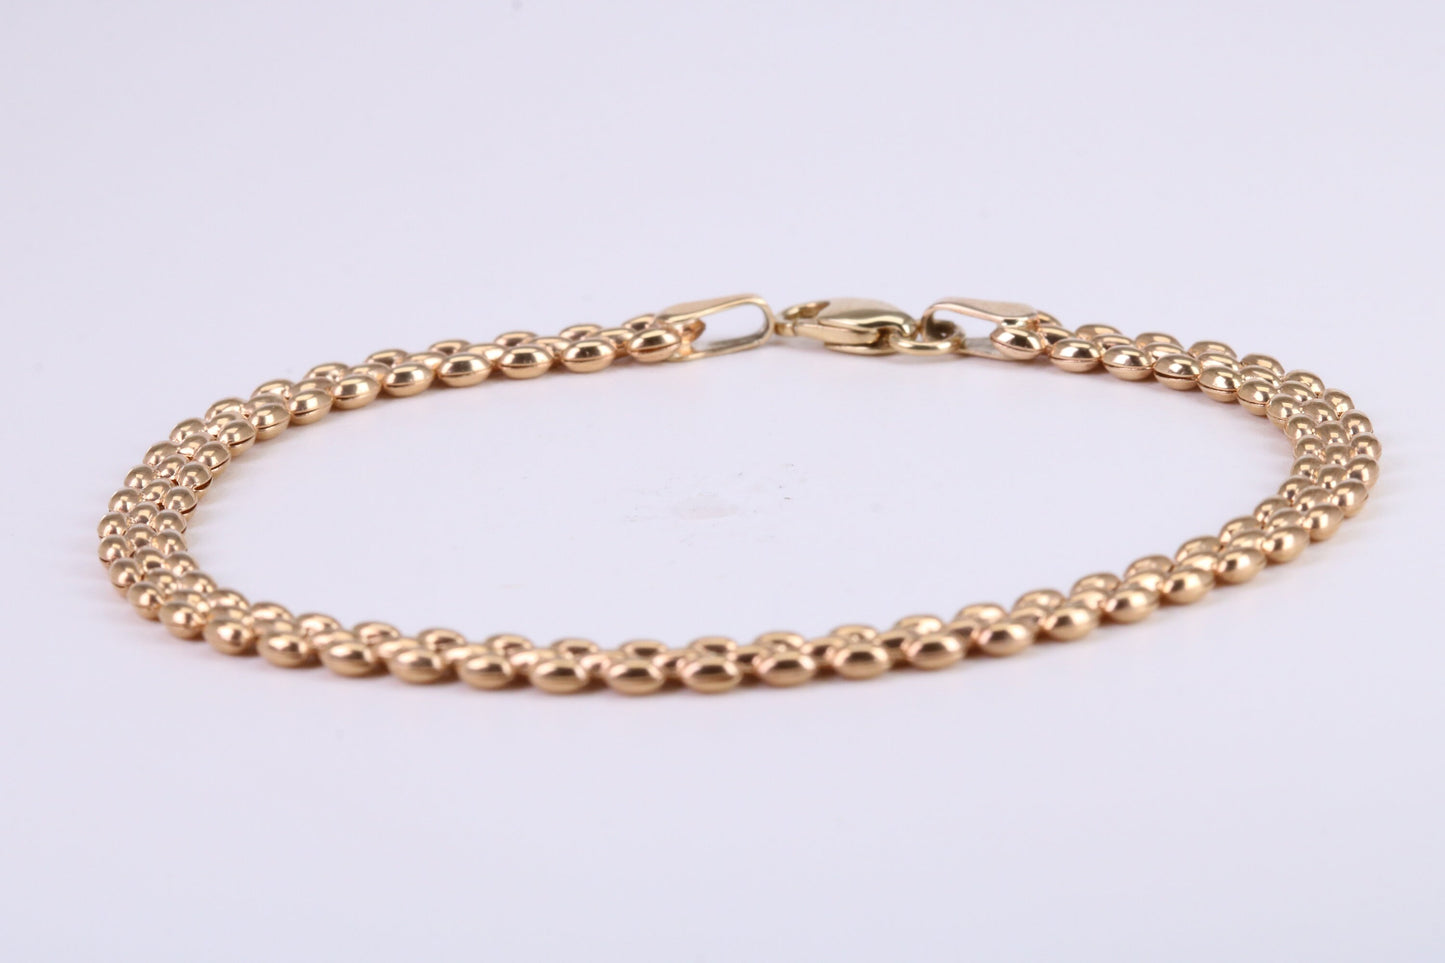 Fancy Link Bracelet, Made From Solid Yellow Gold, British Hallmarked, Luxury Gift Boxed